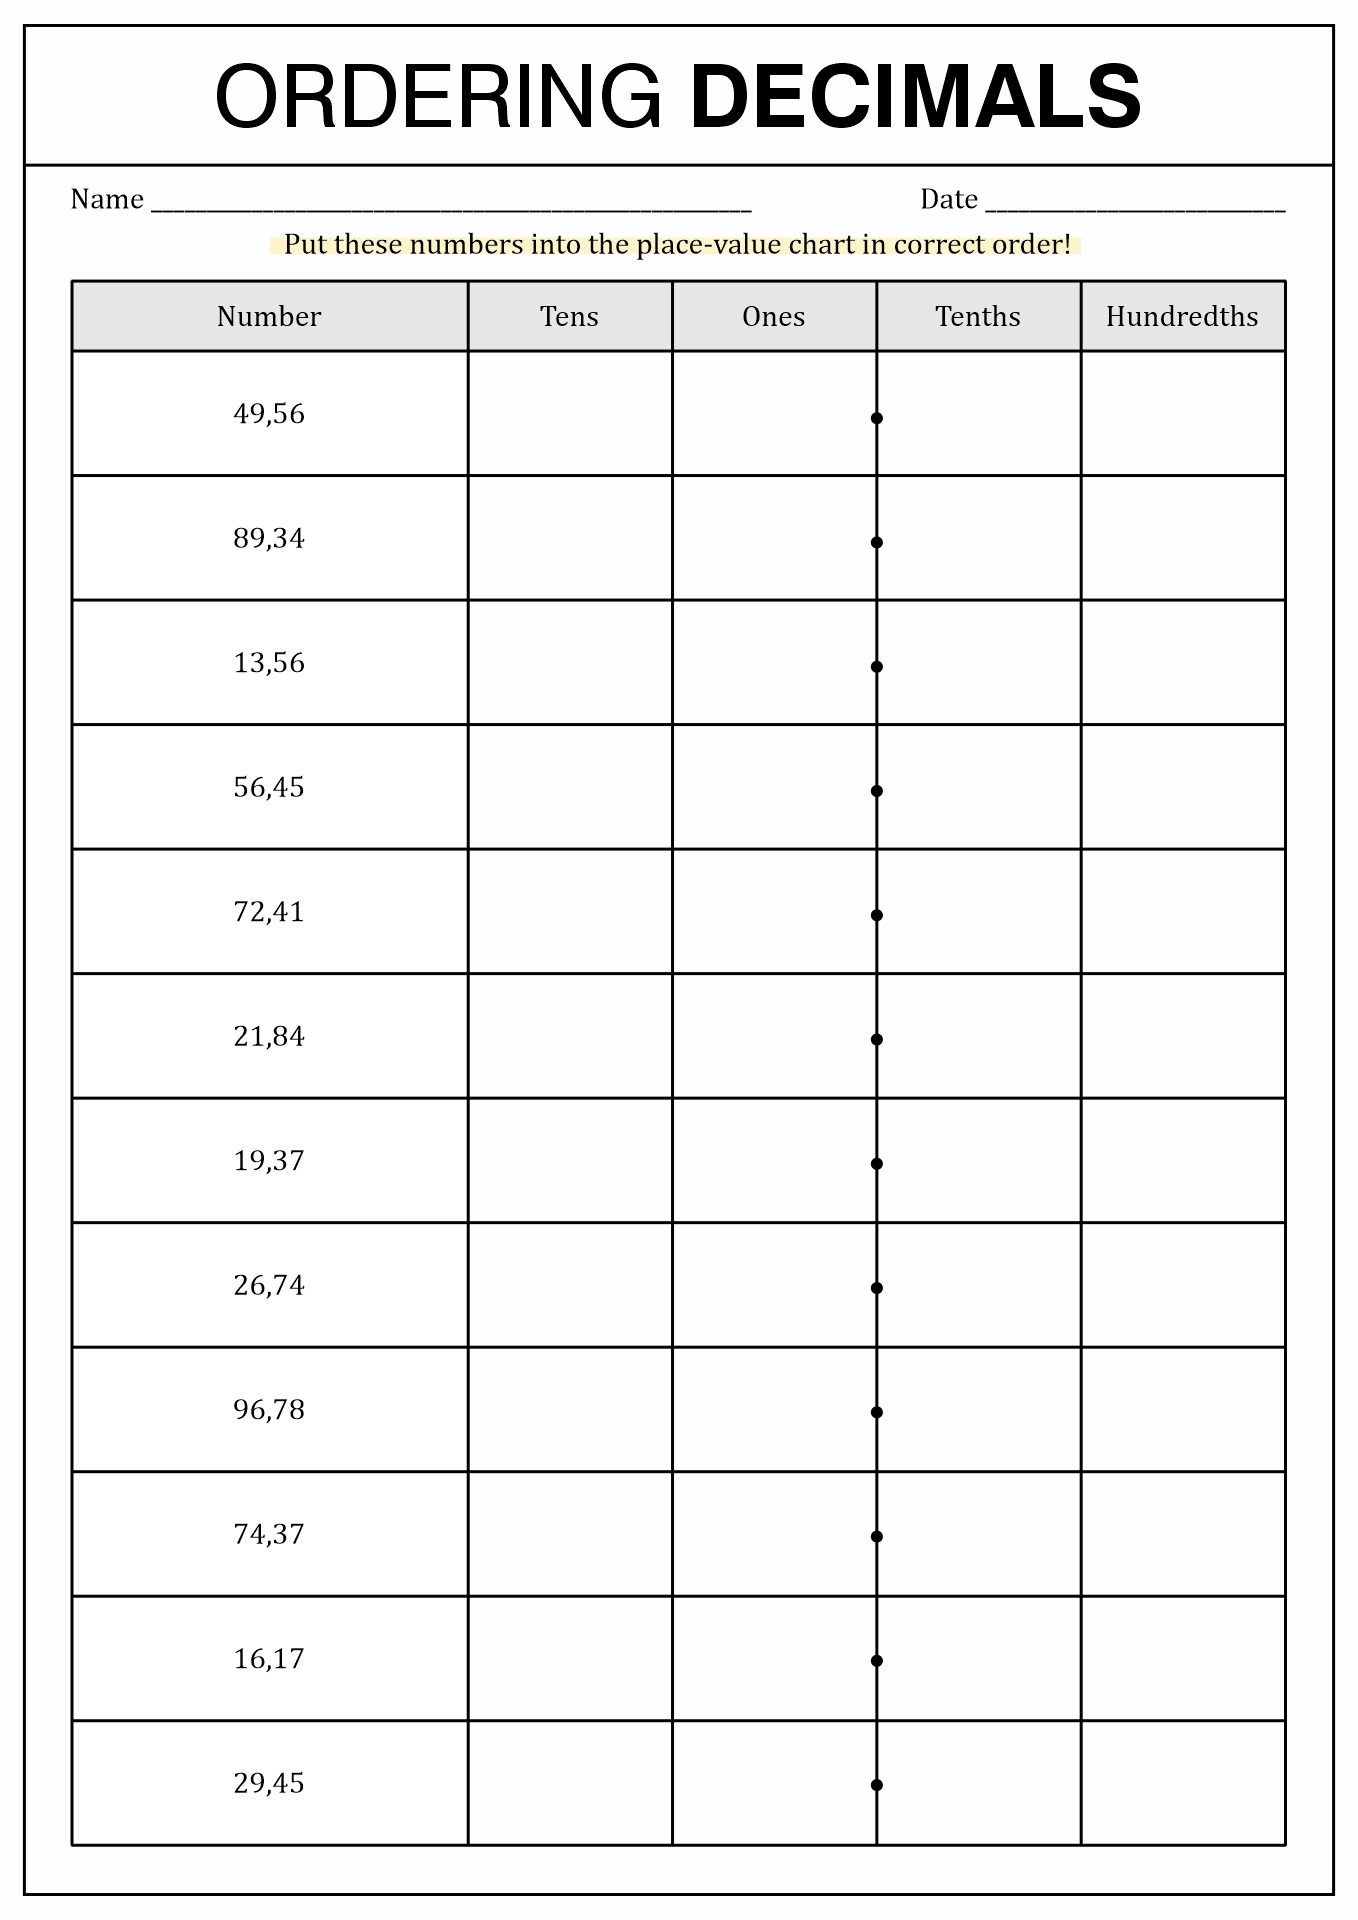 blank-place-value-chart-with-decimals-printable-free-printable-templates